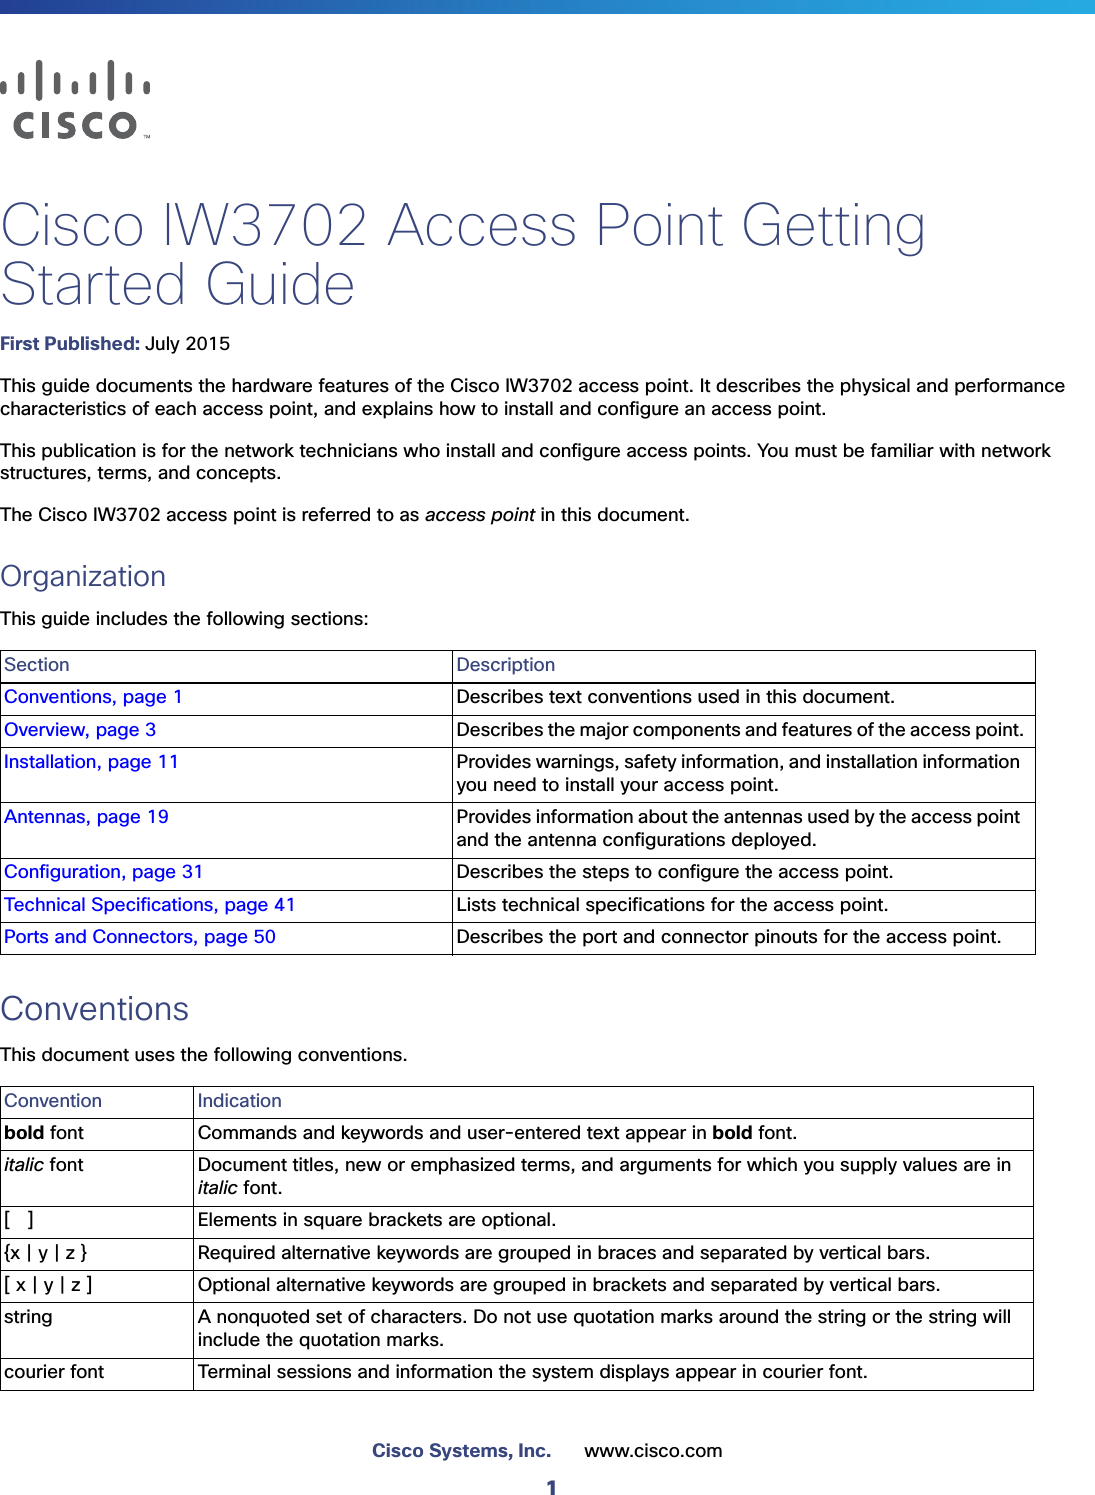 1Cisco Systems, Inc. www.cisco.comCisco IW3702 Access Point Getting Started GuideFirst Published: July 2015This guide documents the hardware features of the Cisco IW3702 access point. It describes the physical and performance characteristics of each access point, and explains how to install and configure an access point.This publication is for the network technicians who install and configure access points. You must be familiar with network structures, terms, and concepts.The Cisco IW3702 access point is referred to as access point in this document.OrganizationThis guide includes the following sections:ConventionsThis document uses the following conventions. Section DescriptionConventions, page 1 Describes text conventions used in this document.Overview, page 3 Describes the major components and features of the access point.Installation, page 11 Provides warnings, safety information, and installation information you need to install your access point.Antennas, page 19 Provides information about the antennas used by the access point and the antenna configurations deployed.Configuration, page 31 Describes the steps to configure the access point.Technical Specifications, page 41 Lists technical specifications for the access point.Ports and Connectors, page 50 Describes the port and connector pinouts for the access point.Convention Indicationbold font Commands and keywords and user-entered text appear in bold font.italic font Document titles, new or emphasized terms, and arguments for which you supply values are in italic font.[   ] Elements in square brackets are optional.{x | y | z } Required alternative keywords are grouped in braces and separated by vertical bars.[ x | y | z ] Optional alternative keywords are grouped in brackets and separated by vertical bars.string A nonquoted set of characters. Do not use quotation marks around the string or the string will include the quotation marks.courier font Terminal sessions and information the system displays appear in courier font.